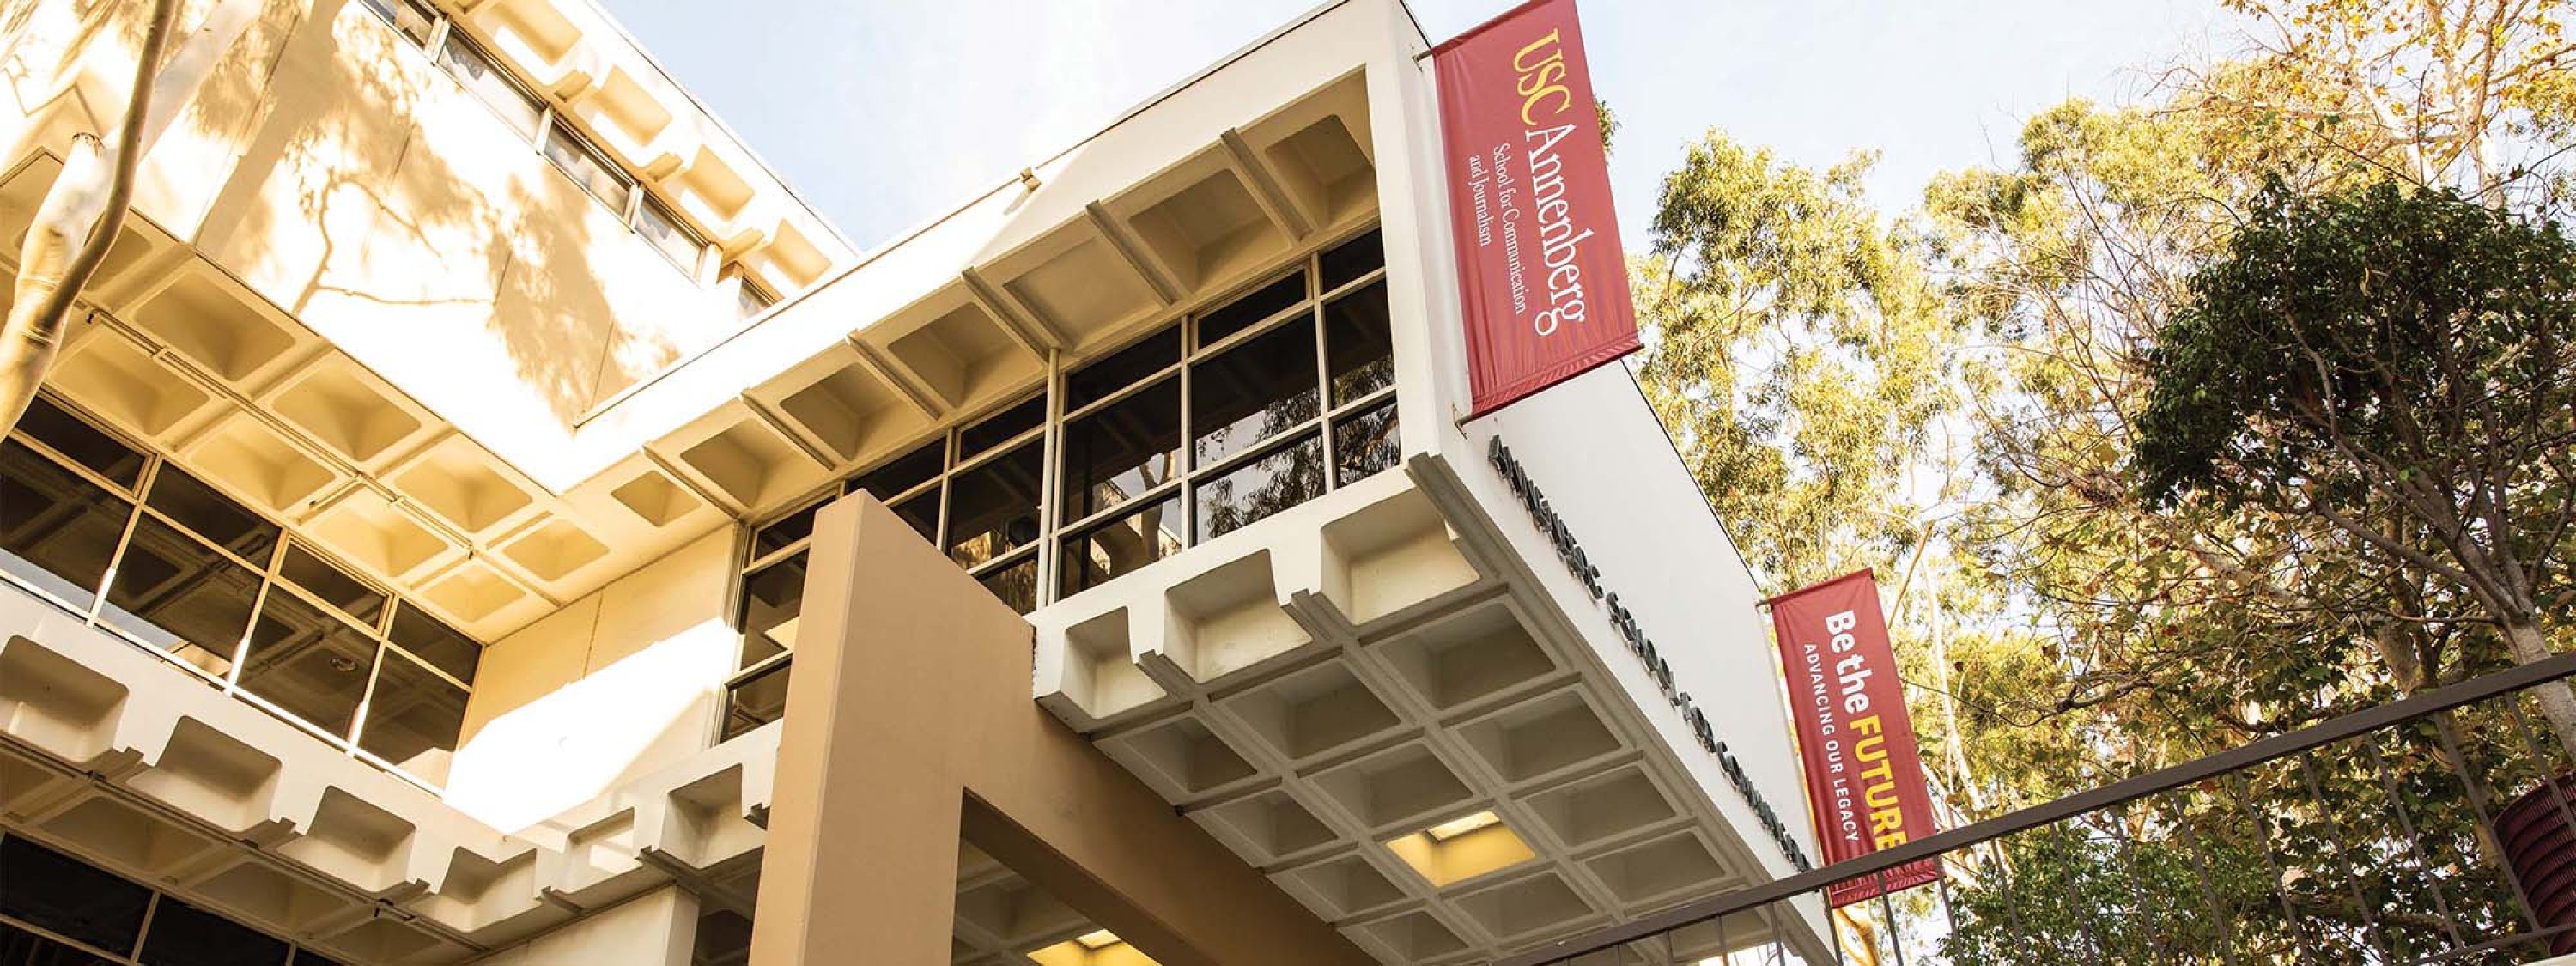 USC Annenberg with Be the Future banners.